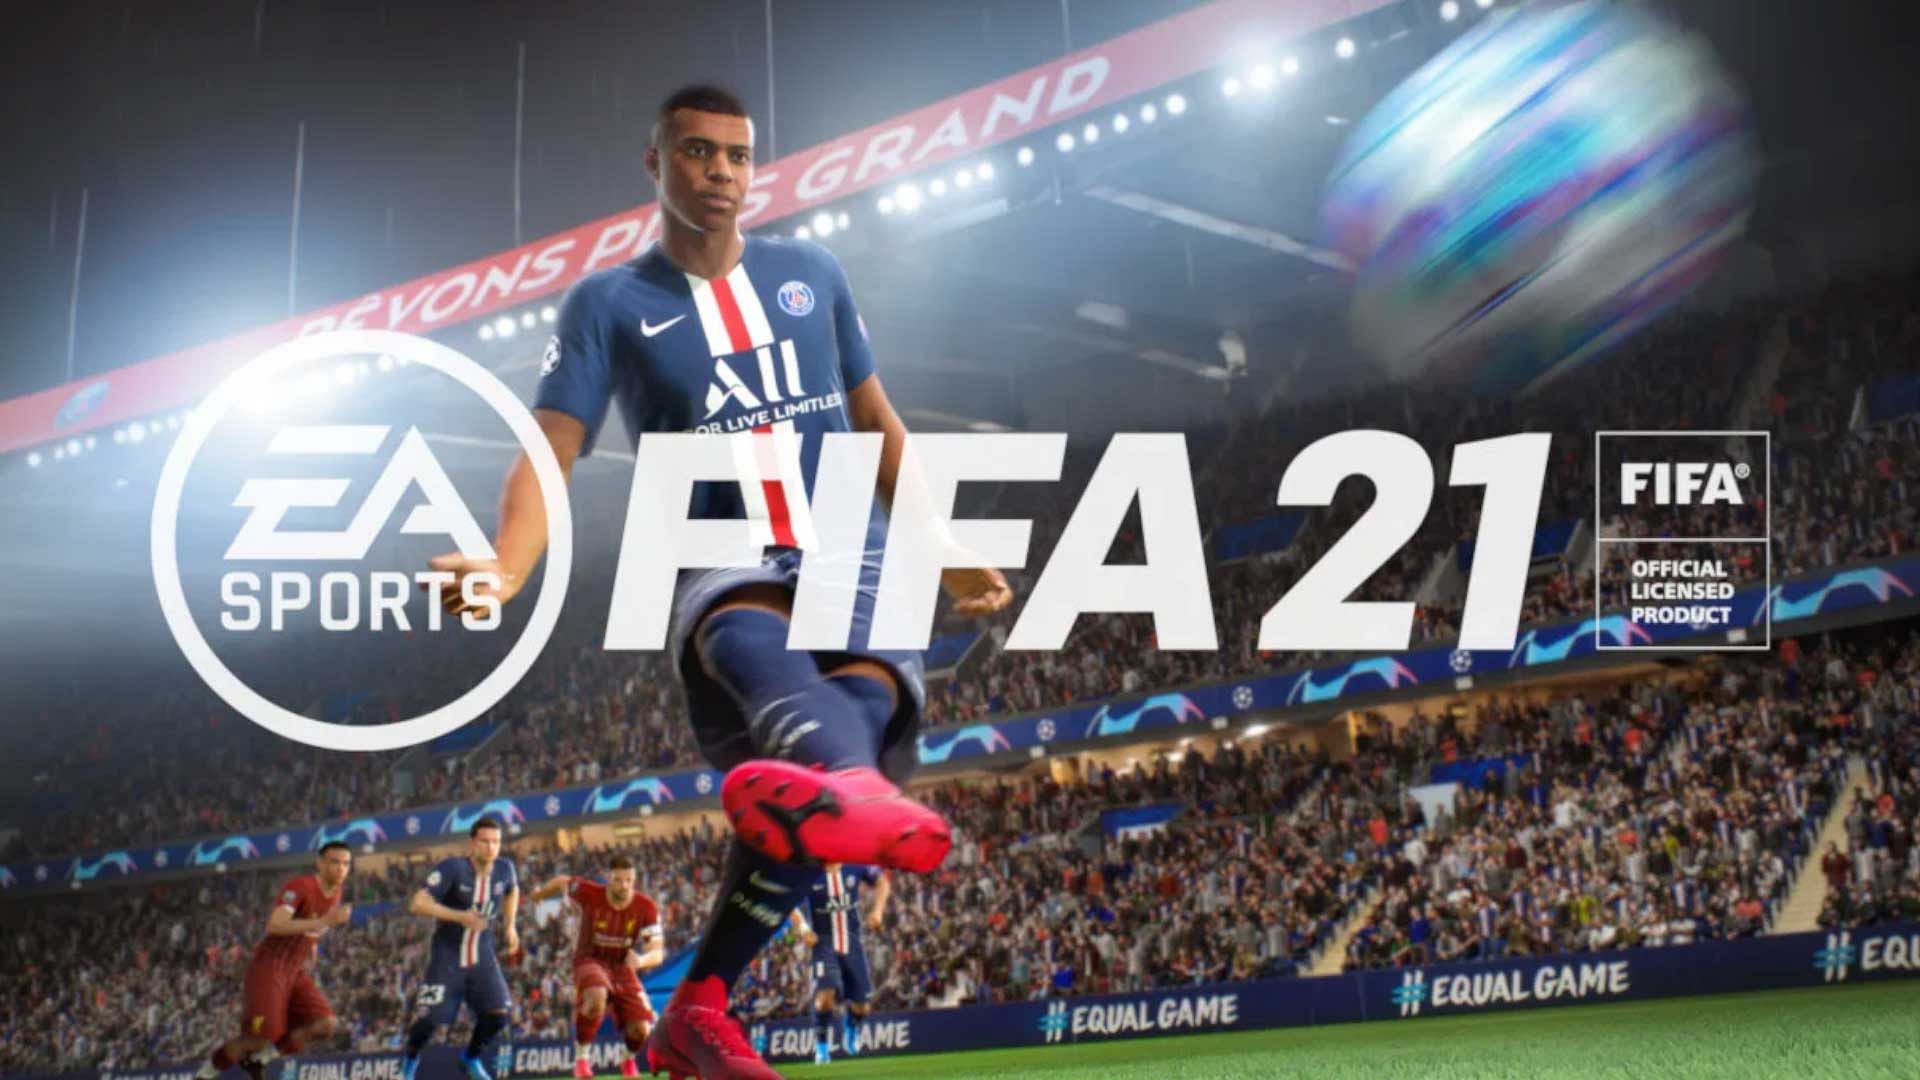 FIFA 21 is this year’s football simulation game from EA Sports.